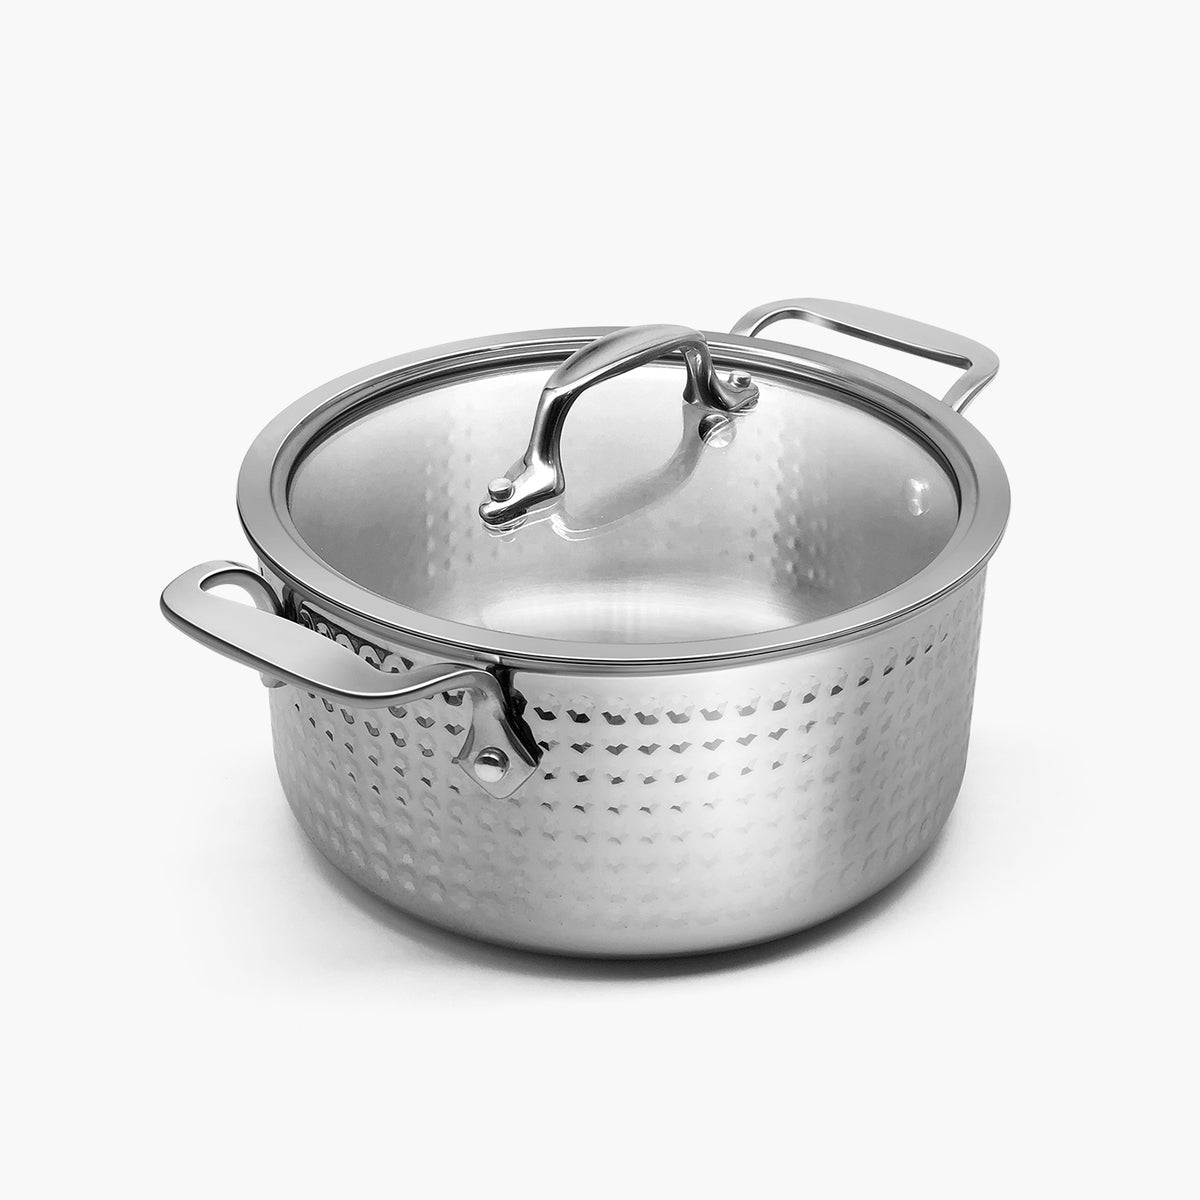 Fortune Candy 4-Quart Saucepan with Lid, Tri-Ply, 18/8 Stainless Steel, Dishwasher Safe, Induction Ready, Mirror Finish (18/8 Steel)